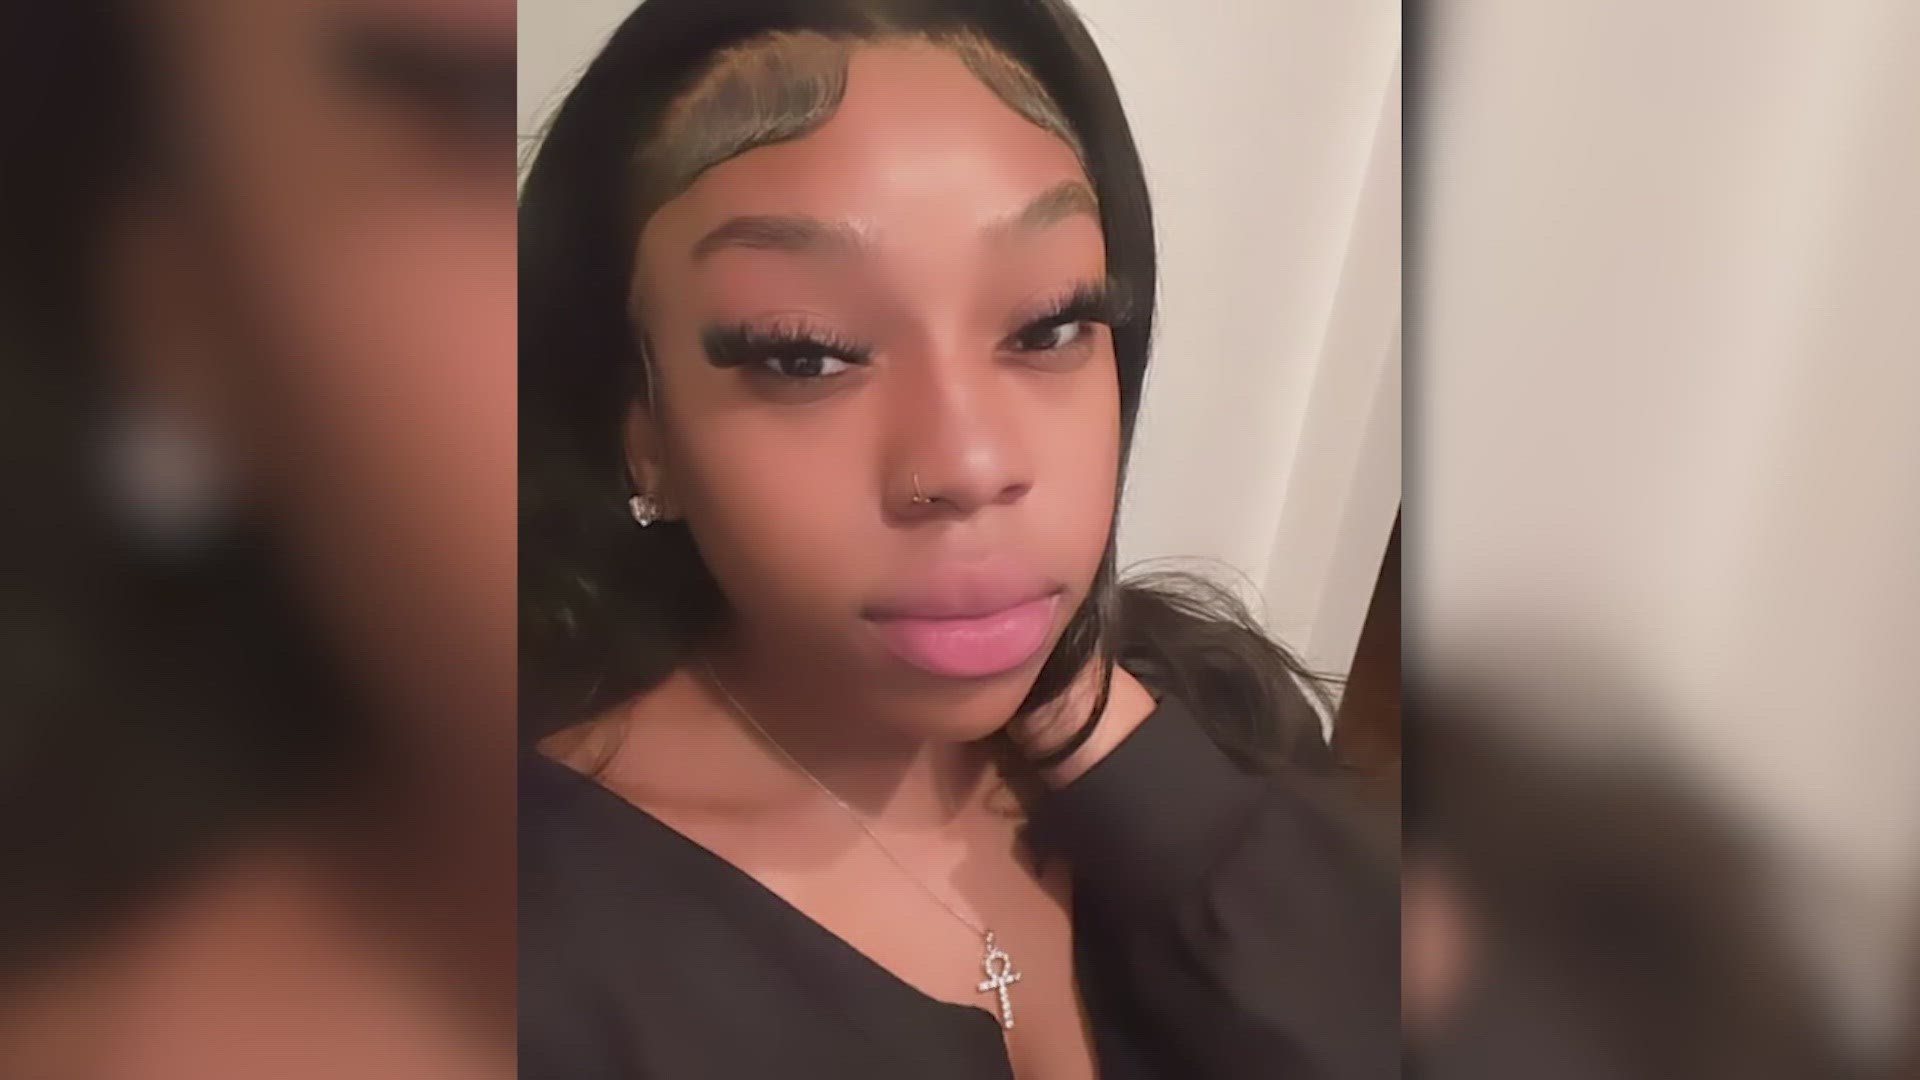 The police department identified the victim as Janeecia "Nene" Mason.